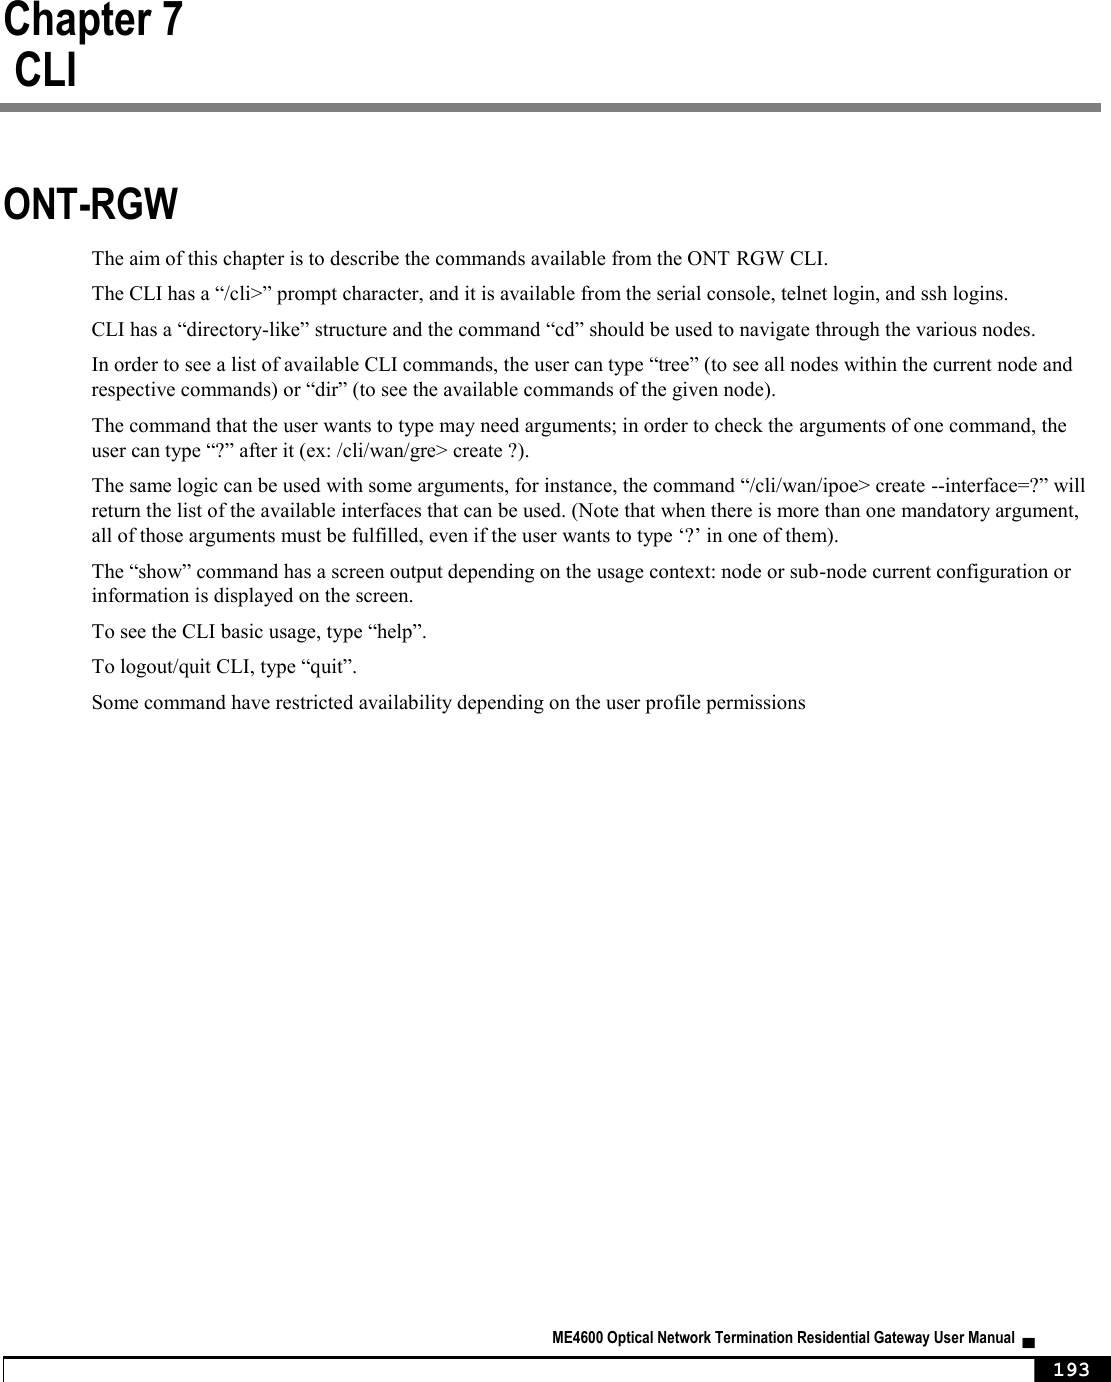  ME4600 Optical Network Termination Residential Gateway User Manual  ▄     193 Chapter 7     CLI ONT-RGW  The aim of this chapter is to describe the commands available from the ONT RGW CLI. The CLI has a “/cli&gt;” prompt character, and it is available from the serial console, telnet login, and ssh logins. CLI has a “directory-like” structure and the command “cd” should be used to navigate through the various nodes. In order to see a list of available CLI commands, the user can type “tree” (to see all nodes within the current node and respective commands) or “dir” (to see the available commands of the given node).  The command that the user wants to type may need arguments; in order to check the arguments of one command, the user can type “?” after it (ex: /cli/wan/gre&gt; create ?). The same logic can be used with some arguments, for instance, the command “/cli/wan/ipoe&gt; create --interface=?” will return the list of the available interfaces that can be used. (Note that when there is more than one mandatory argument, all of those arguments must be fulfilled, even if the user wants to type ‘?’ in one of them). The “show” command has a screen output depending on the usage context: node or sub-node current configuration or information is displayed on the screen. To see the CLI basic usage, type “help”. To logout/quit CLI, type “quit”. Some command have restricted availability depending on the user profile permissions  